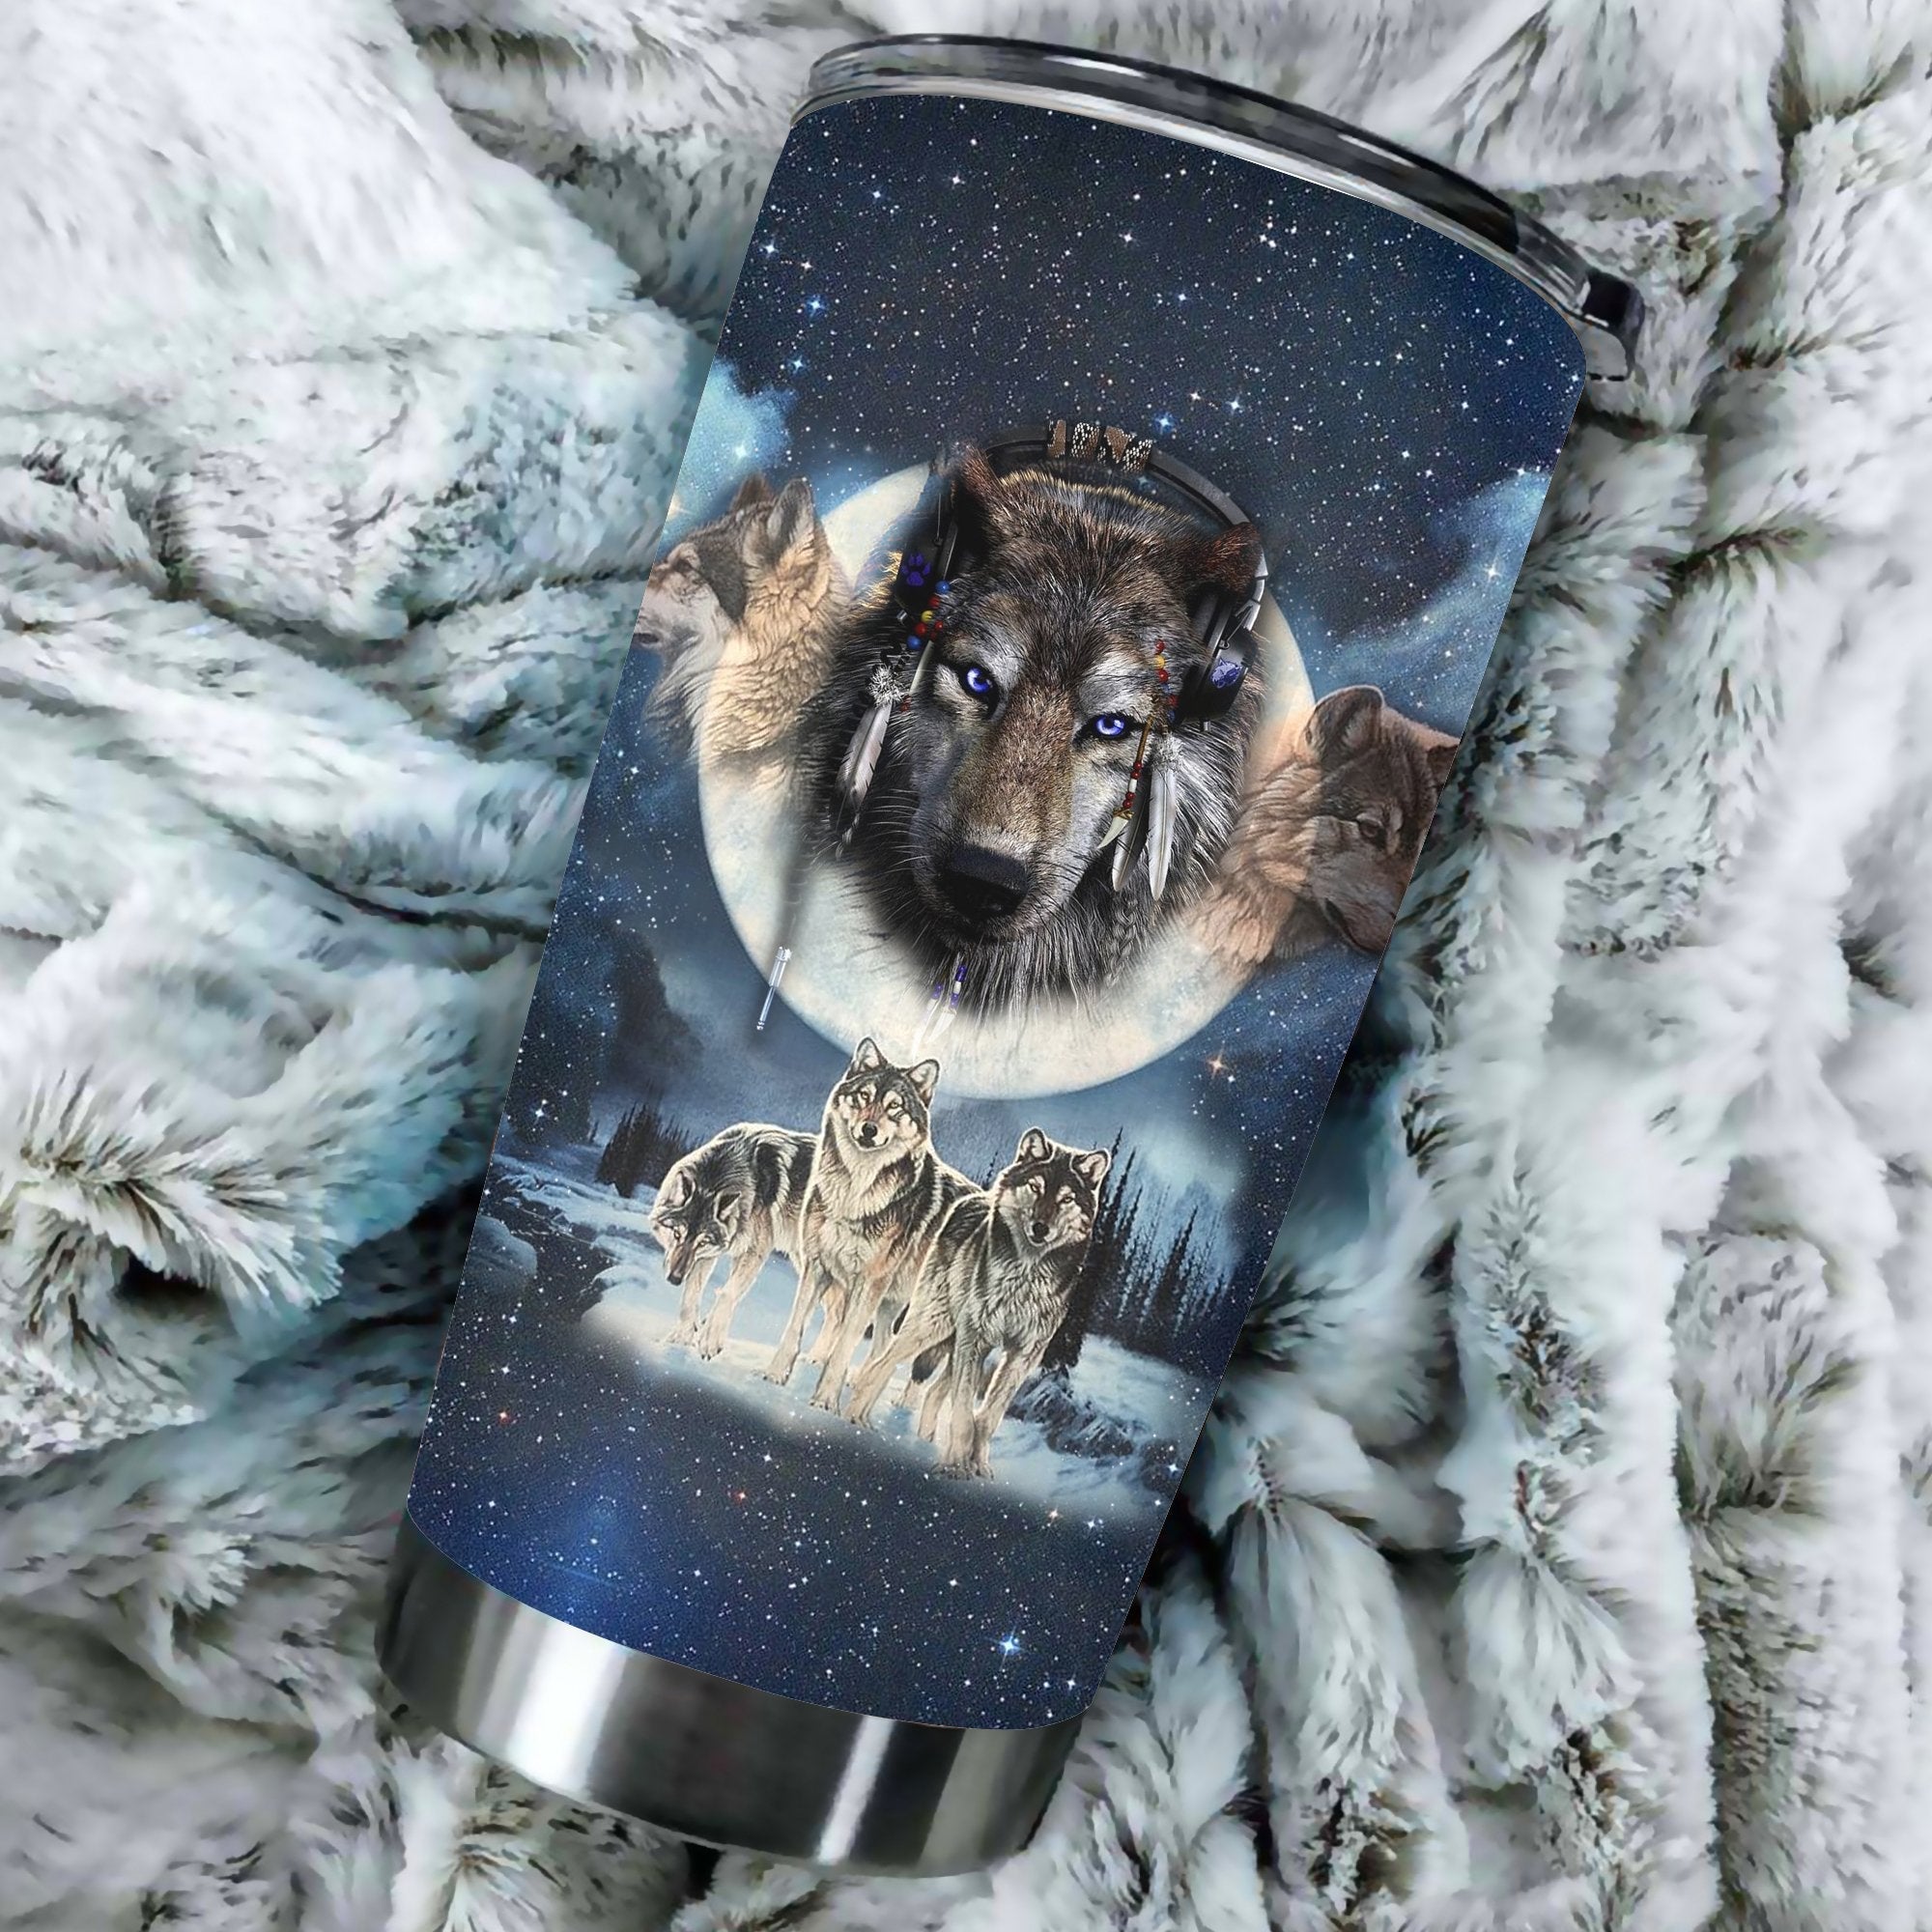 The Wolf Tumbler WCS